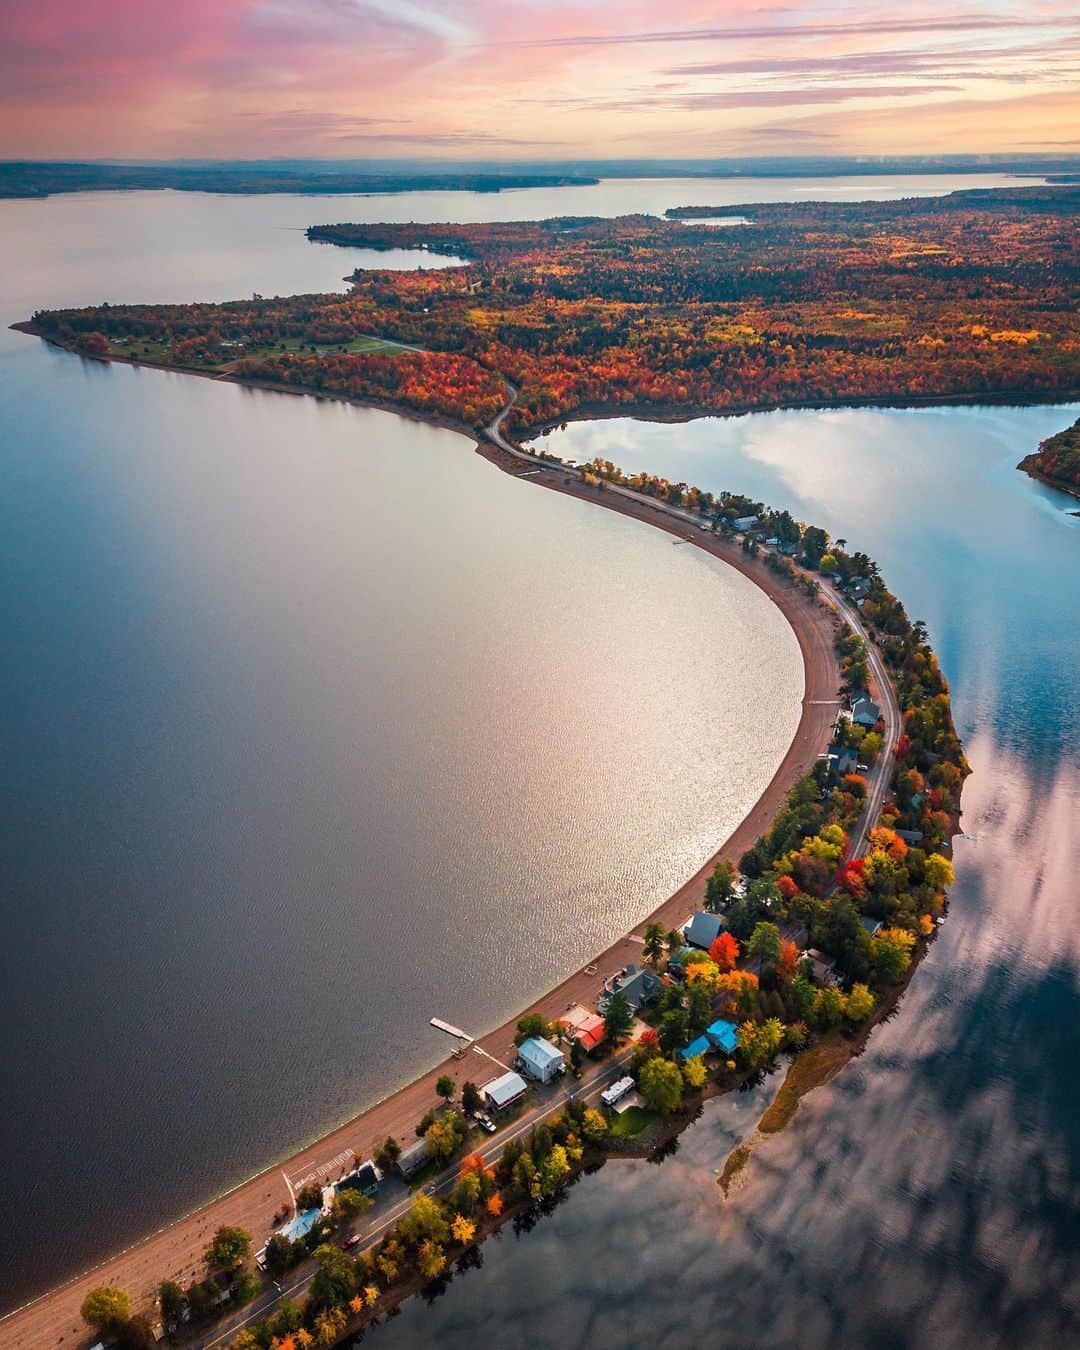 Explore Canadaのインスタグラム：「Fall views across a grand playground.   Grand Lake is the largest freshwater lake in New Brunswick, stretching over 32 kilometres (20 miles) long which makes it a water sports paradise! It’s also a bird watching haven and home to the most stunning sunsets.   📷: @st3mm3r  📍: Princess Park, Grand Lake, @destinationnb   #ExploreNB #ExploreCanada  Image description: An aerial view of the Princess Park isthmus; a tree-lined road flanked on both sides by water, and leading to a peninsula dotted with bright, Autumn coloured trees. The evening sky has shades of pink and orange.」